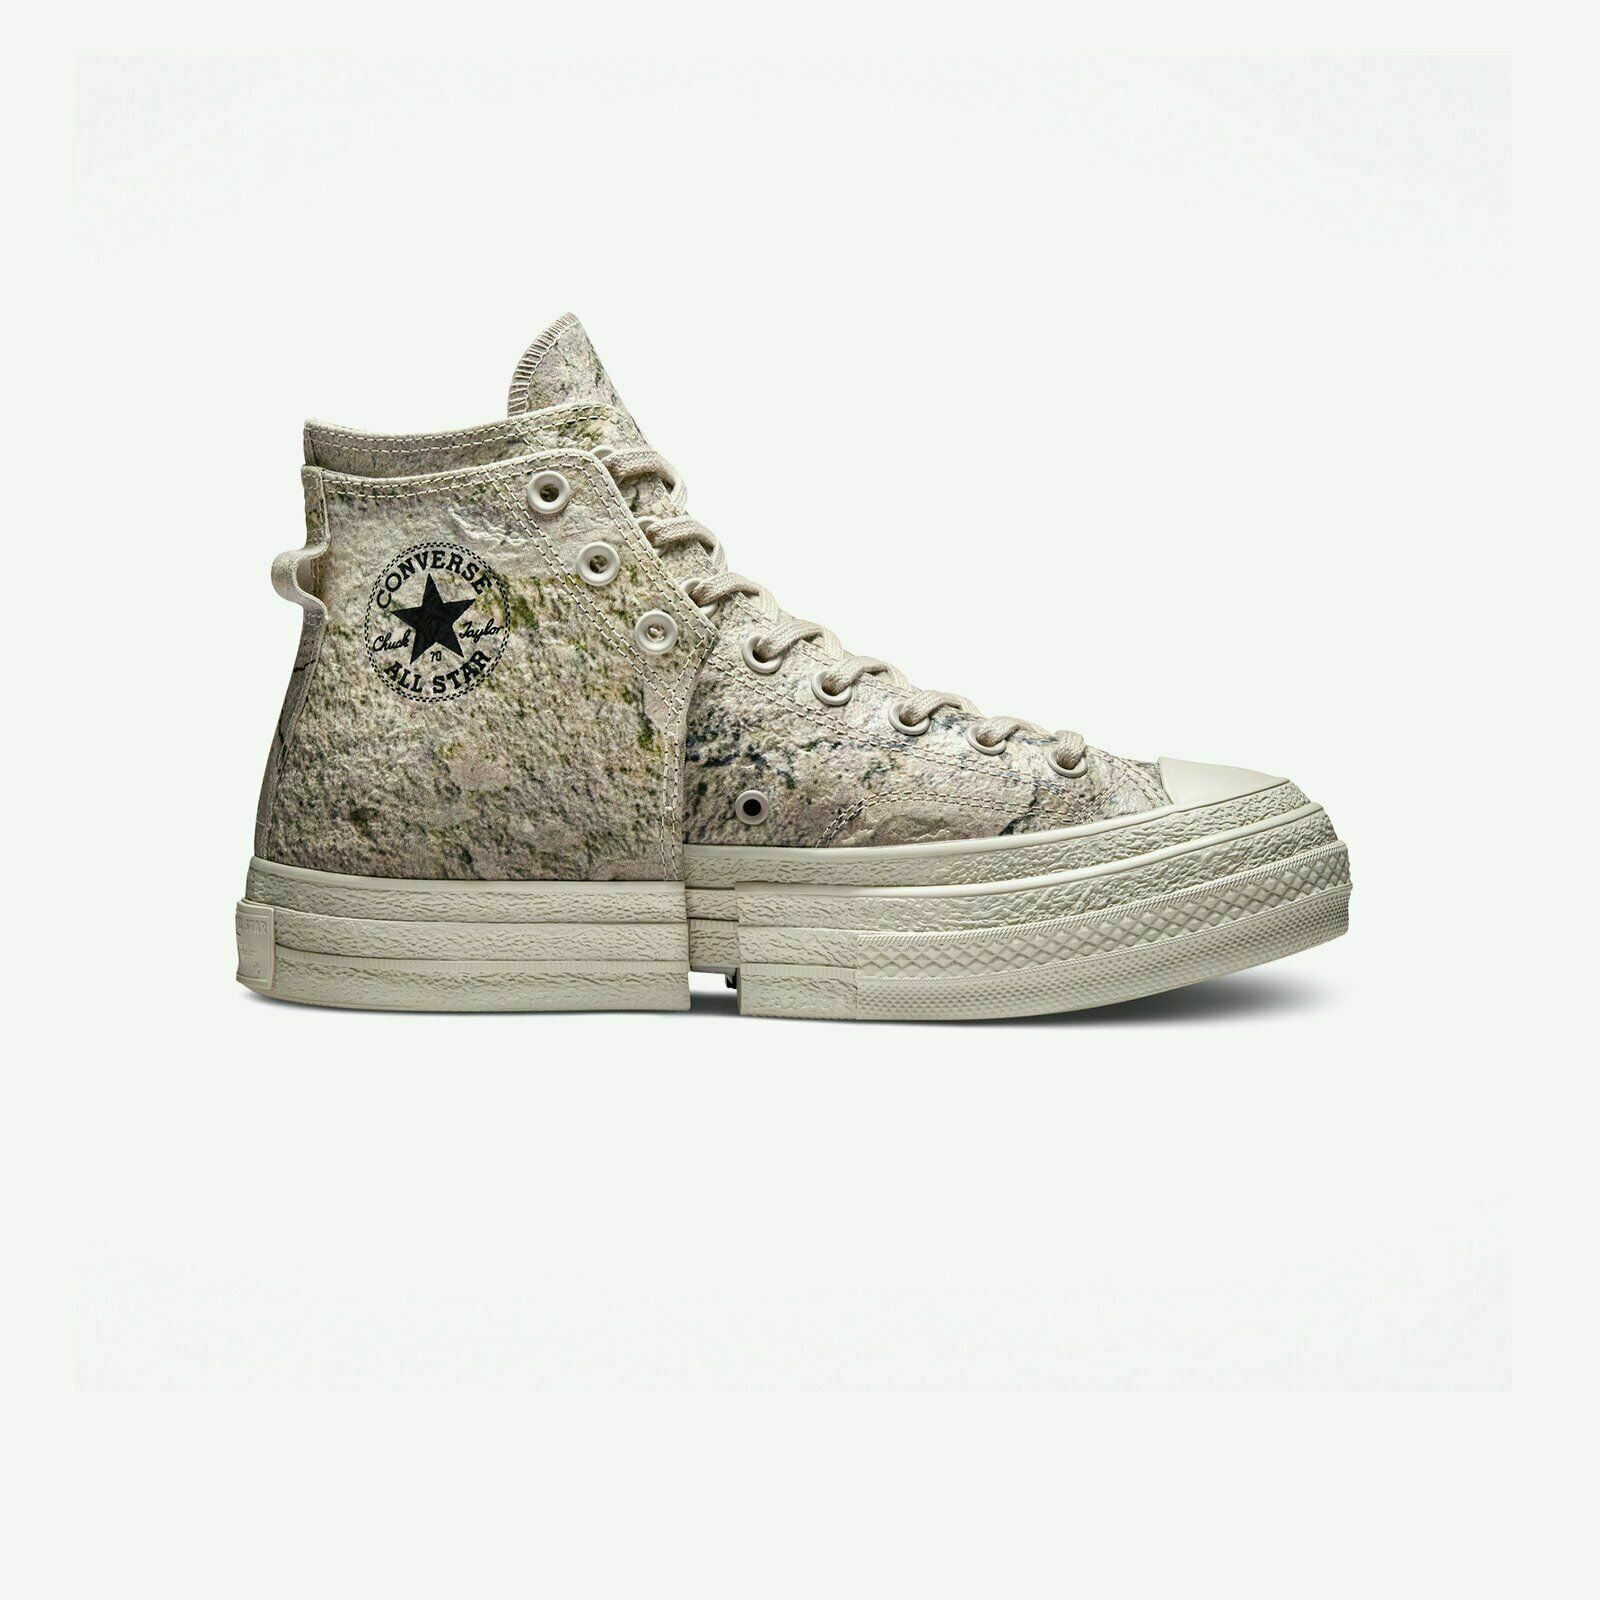 There is a need to Drama Anoi Converse Feng Chen Wang Chuck 70 2 in 1 Hi Men's Limited Sneaker Shoe  171838C - Walmart.com